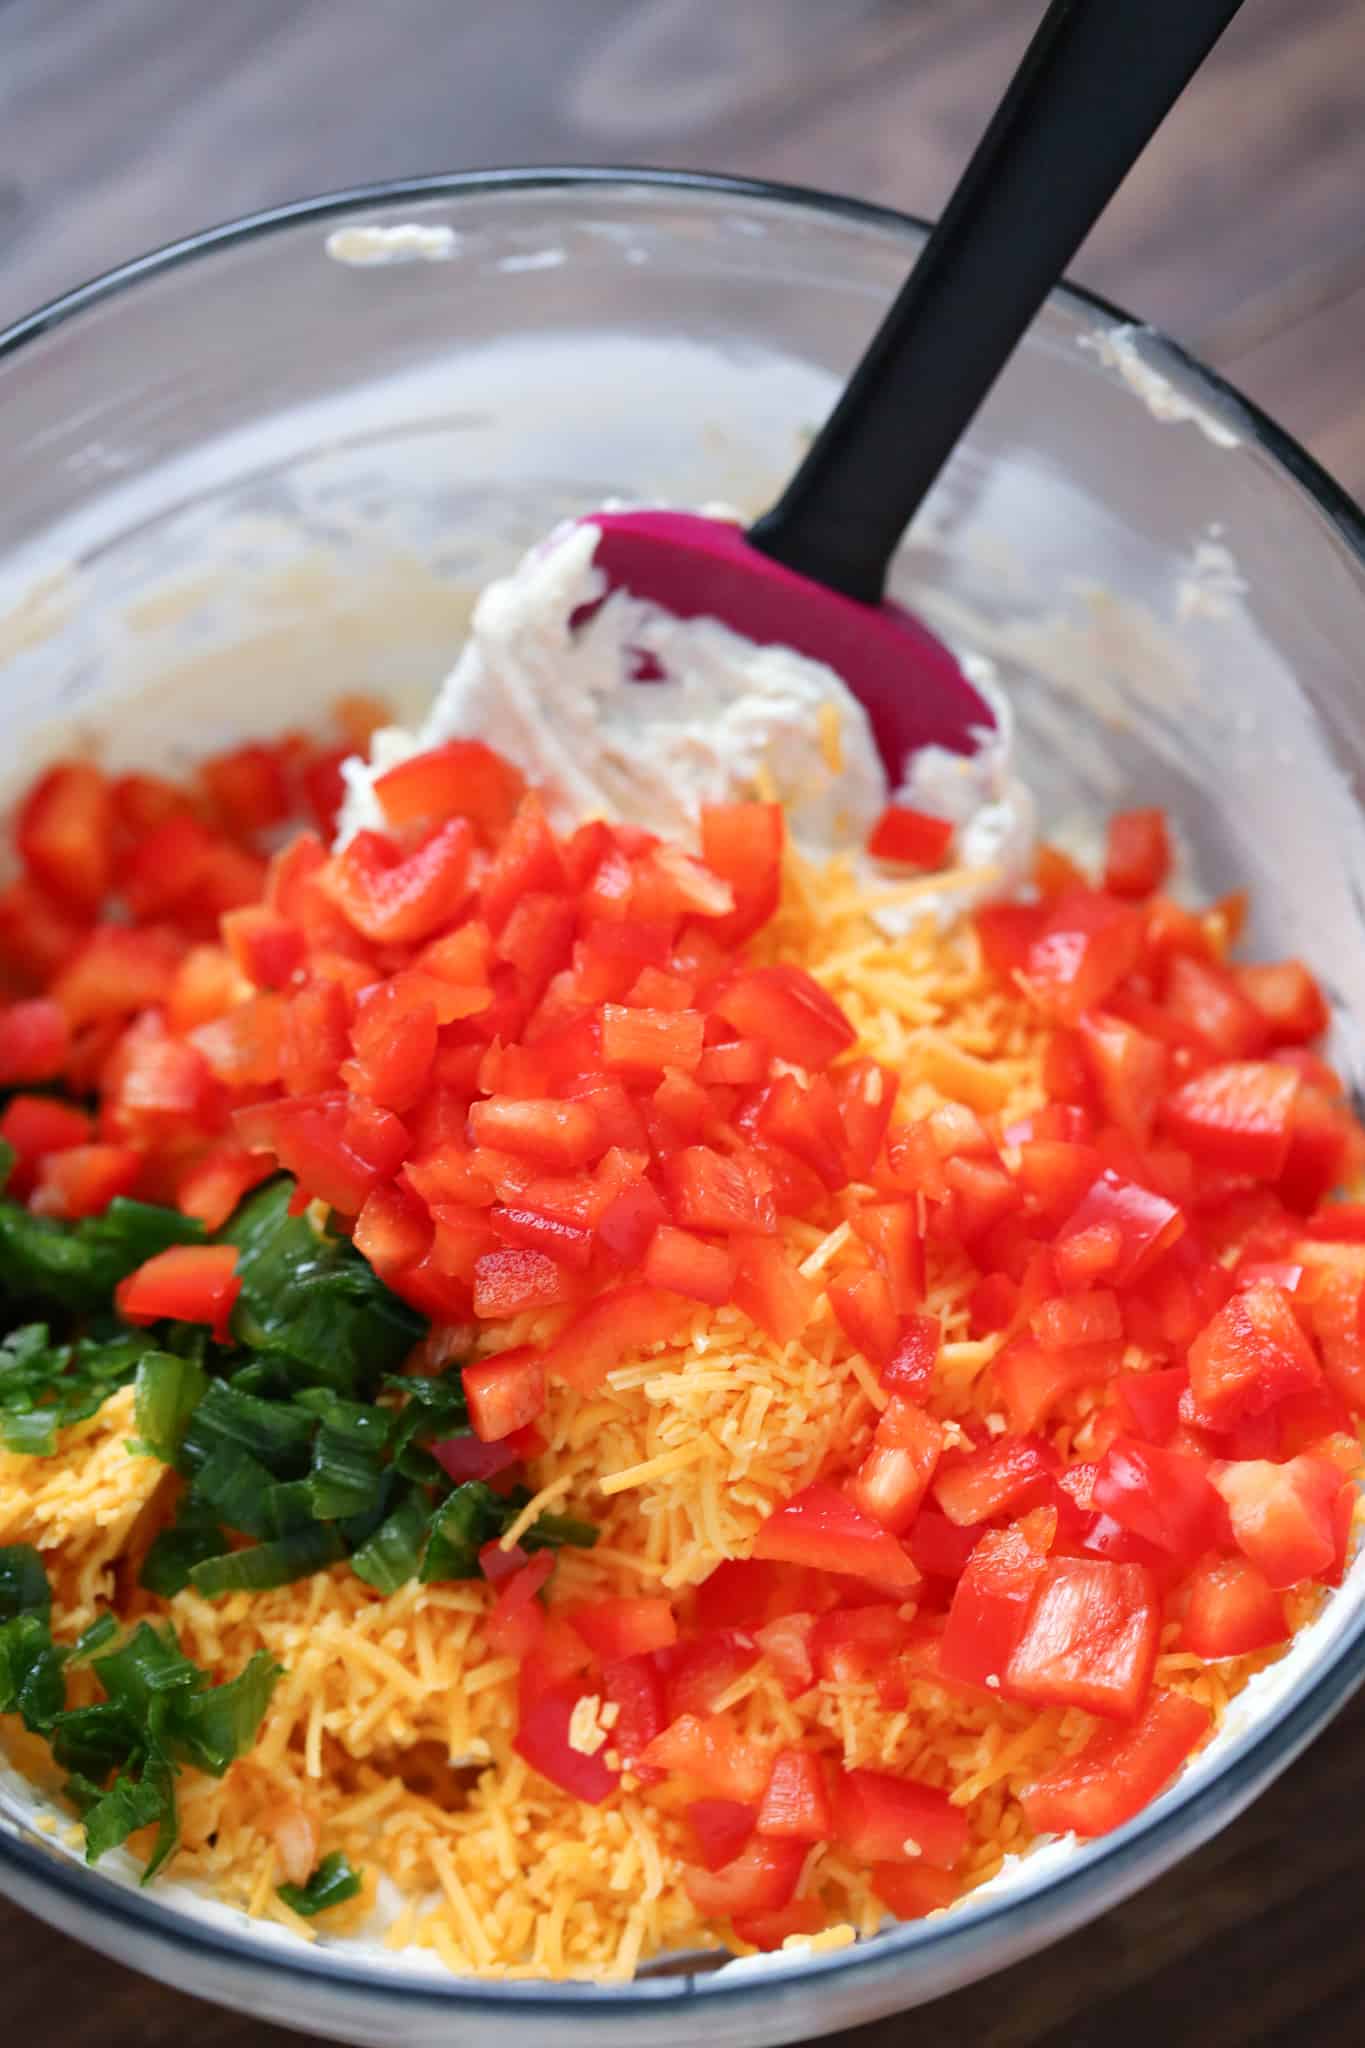 ranch dressing. diced red pepper, green onion and shredded cheddar cheese added to cream cheese mixture.